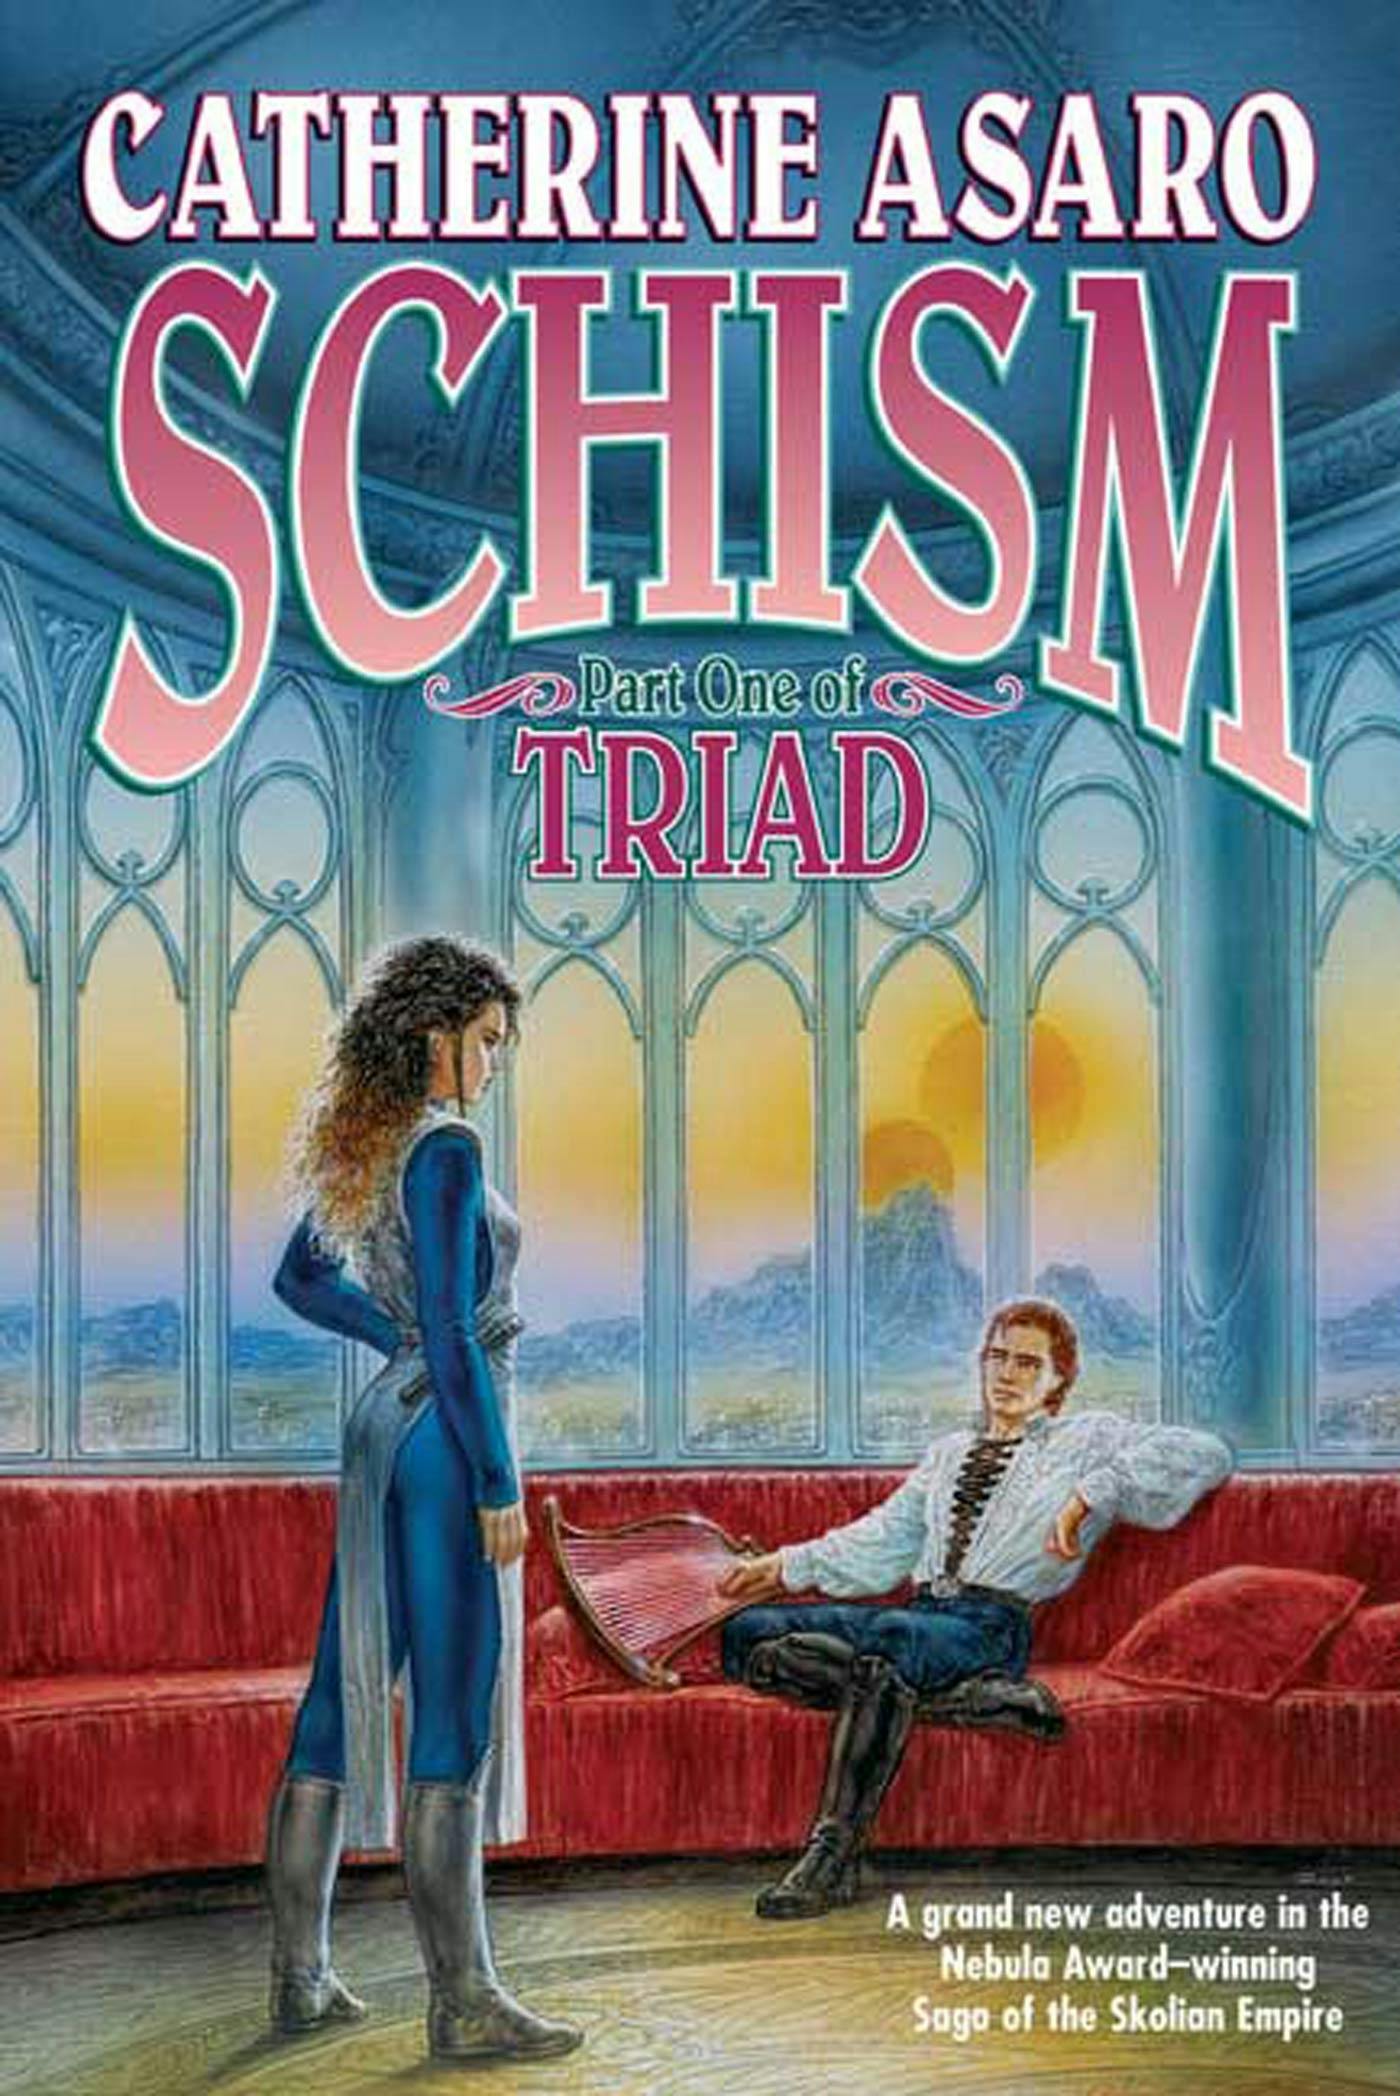 Cover for the book titled as: Schism